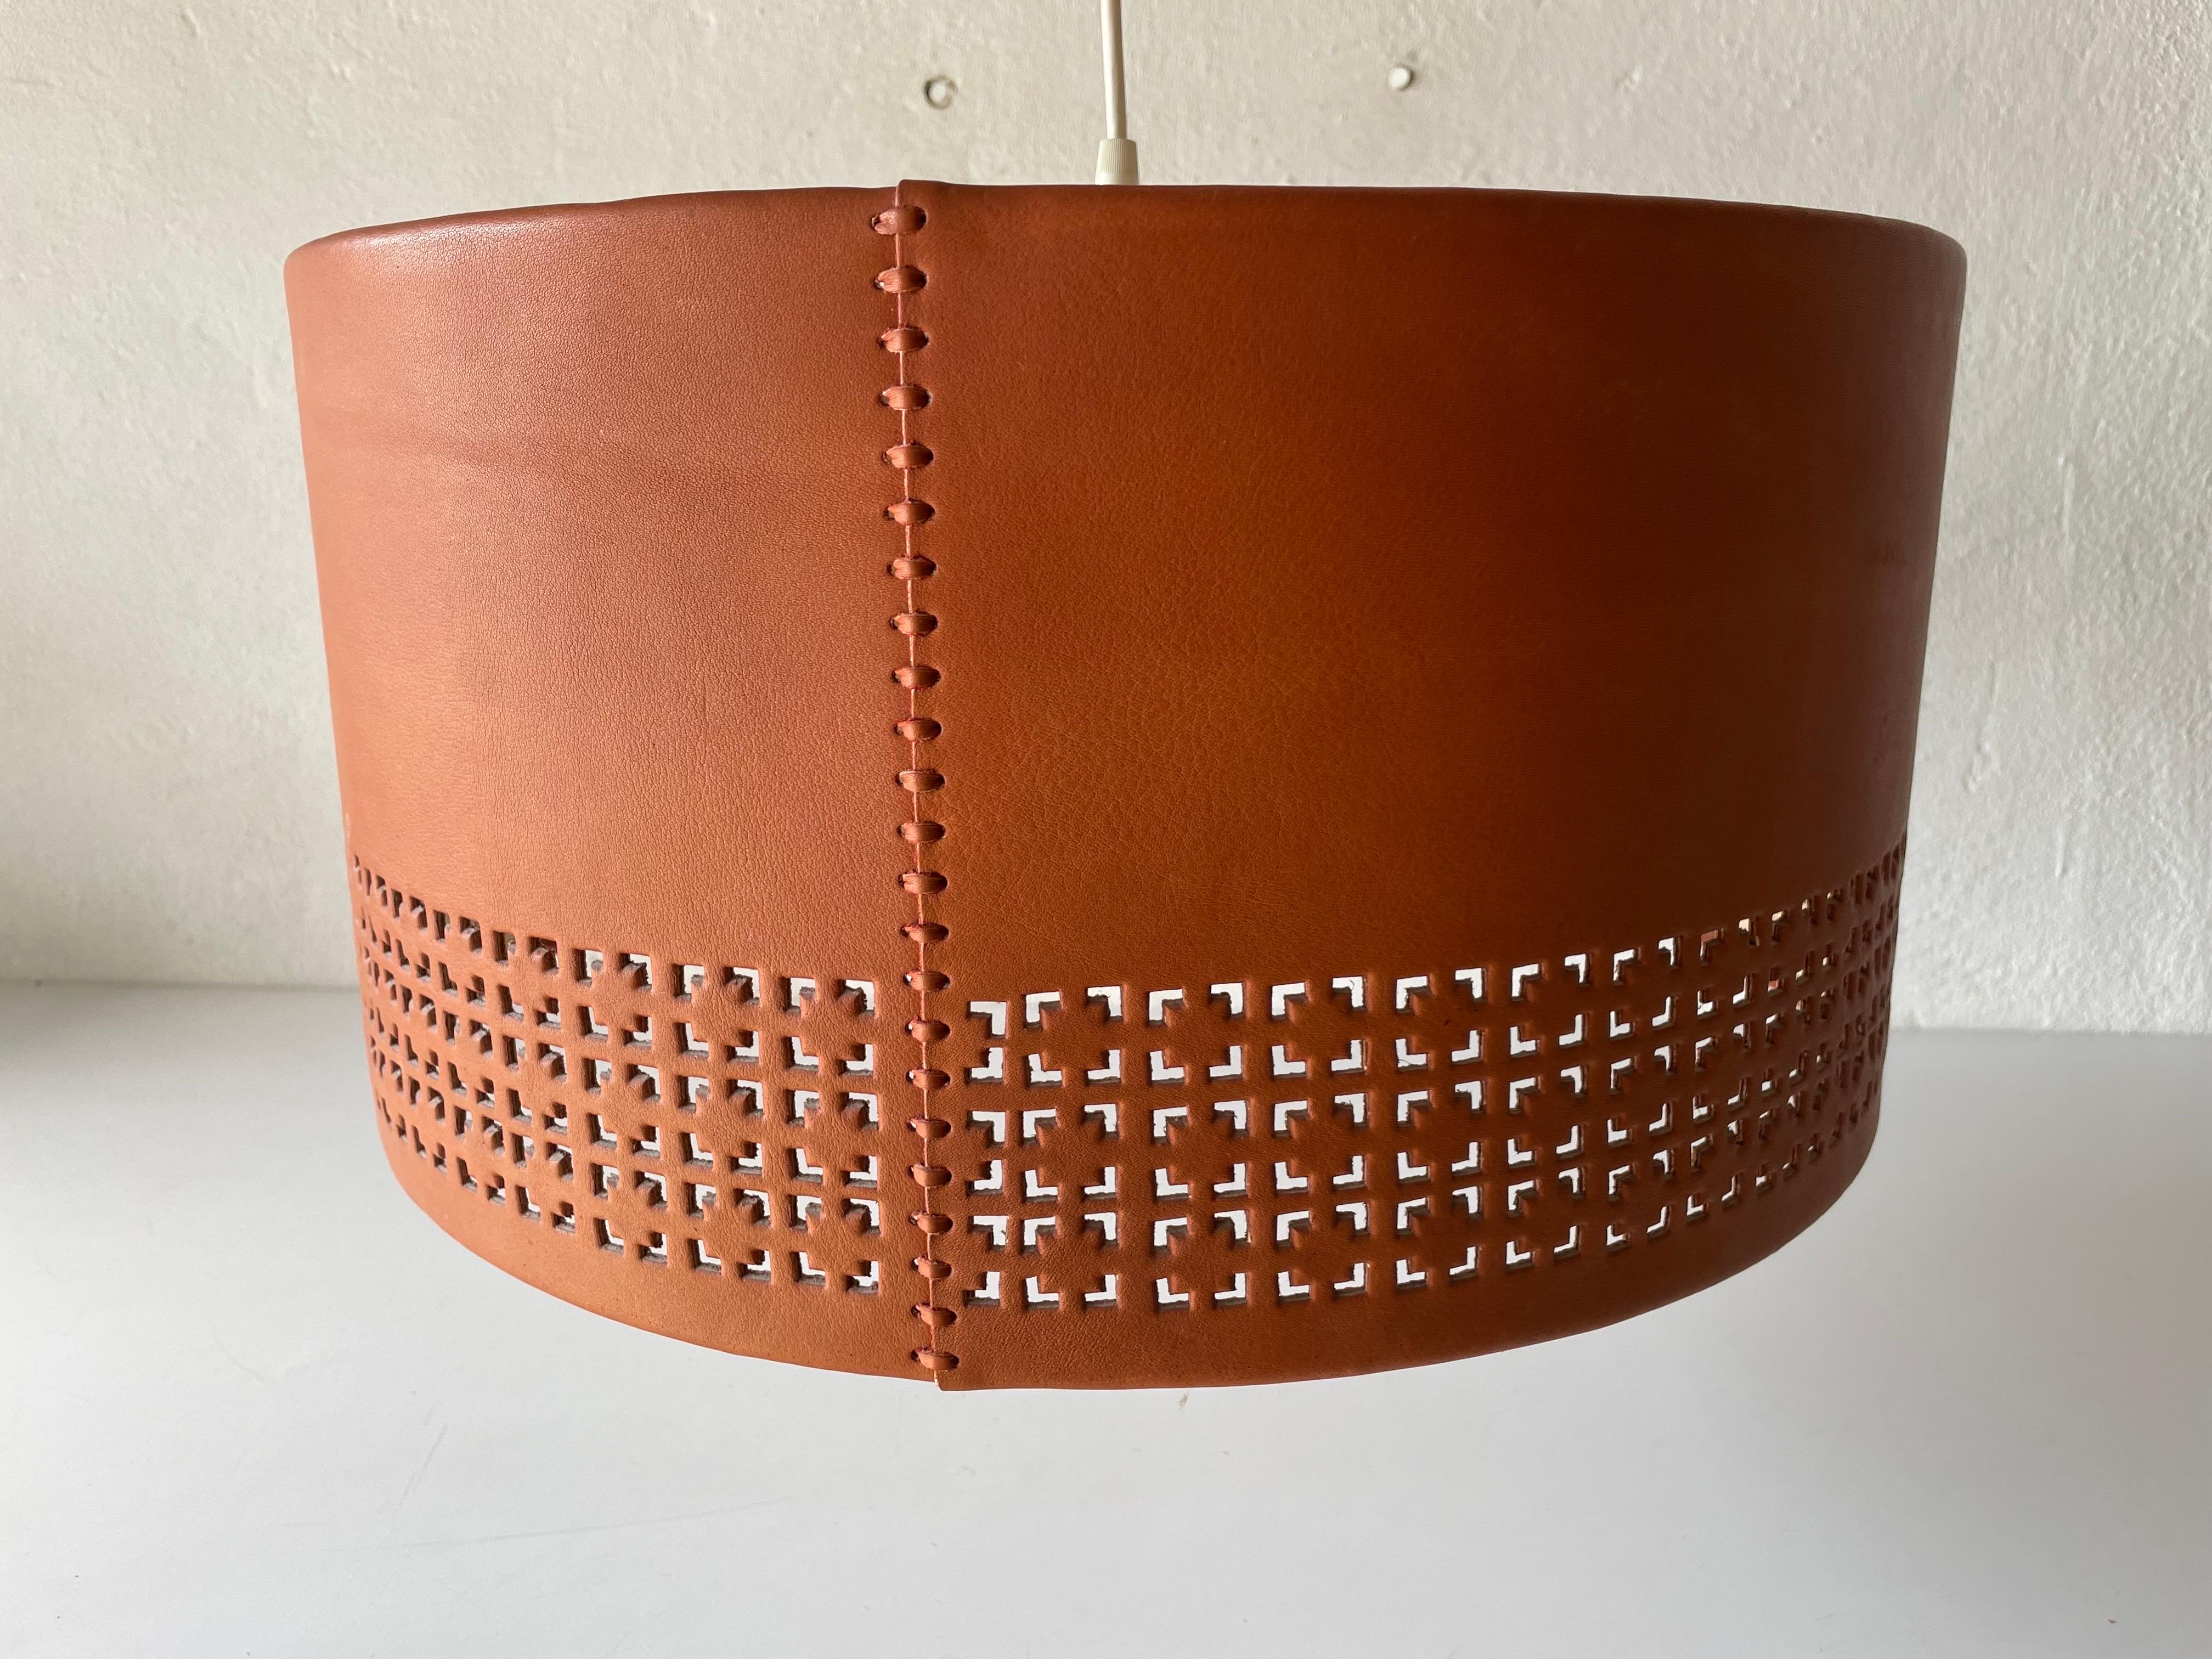 Cylindrical Leather Shade with Motifs Counterweight Pendant Lamp, 1960s, Germany For Sale 6